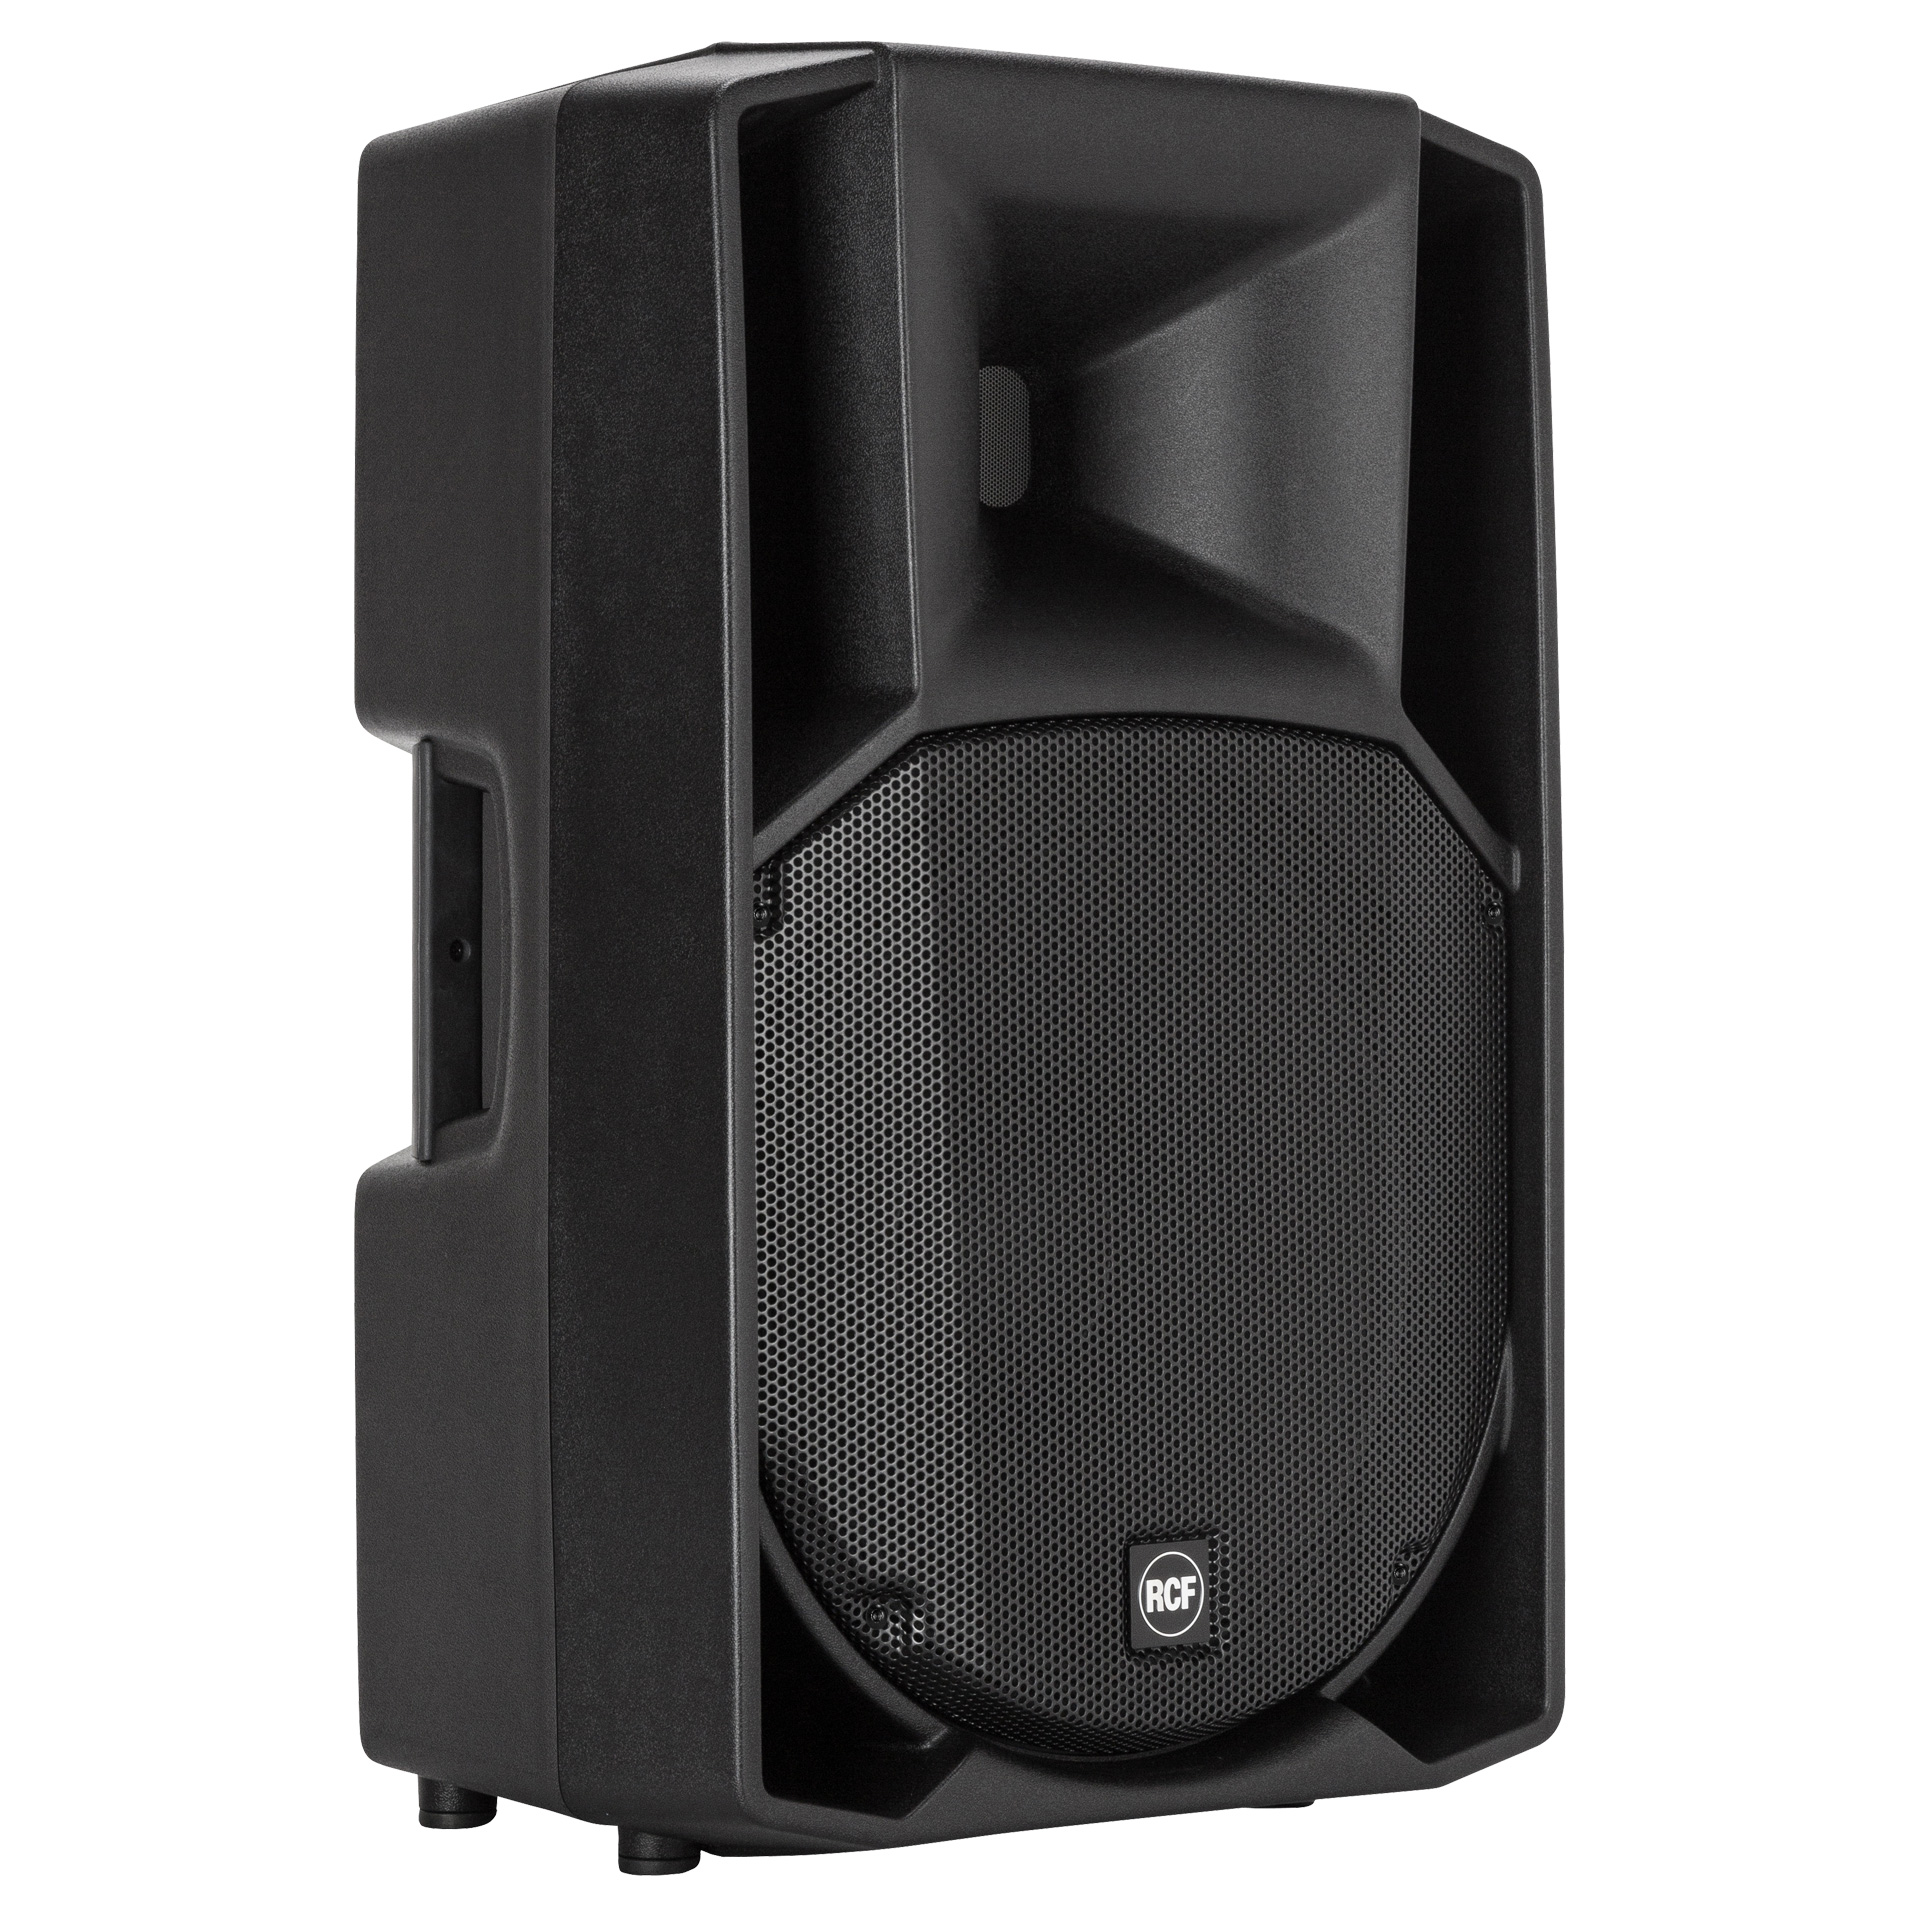 Right view of the RCF ART 735-A MK4 2-Way Active speaker